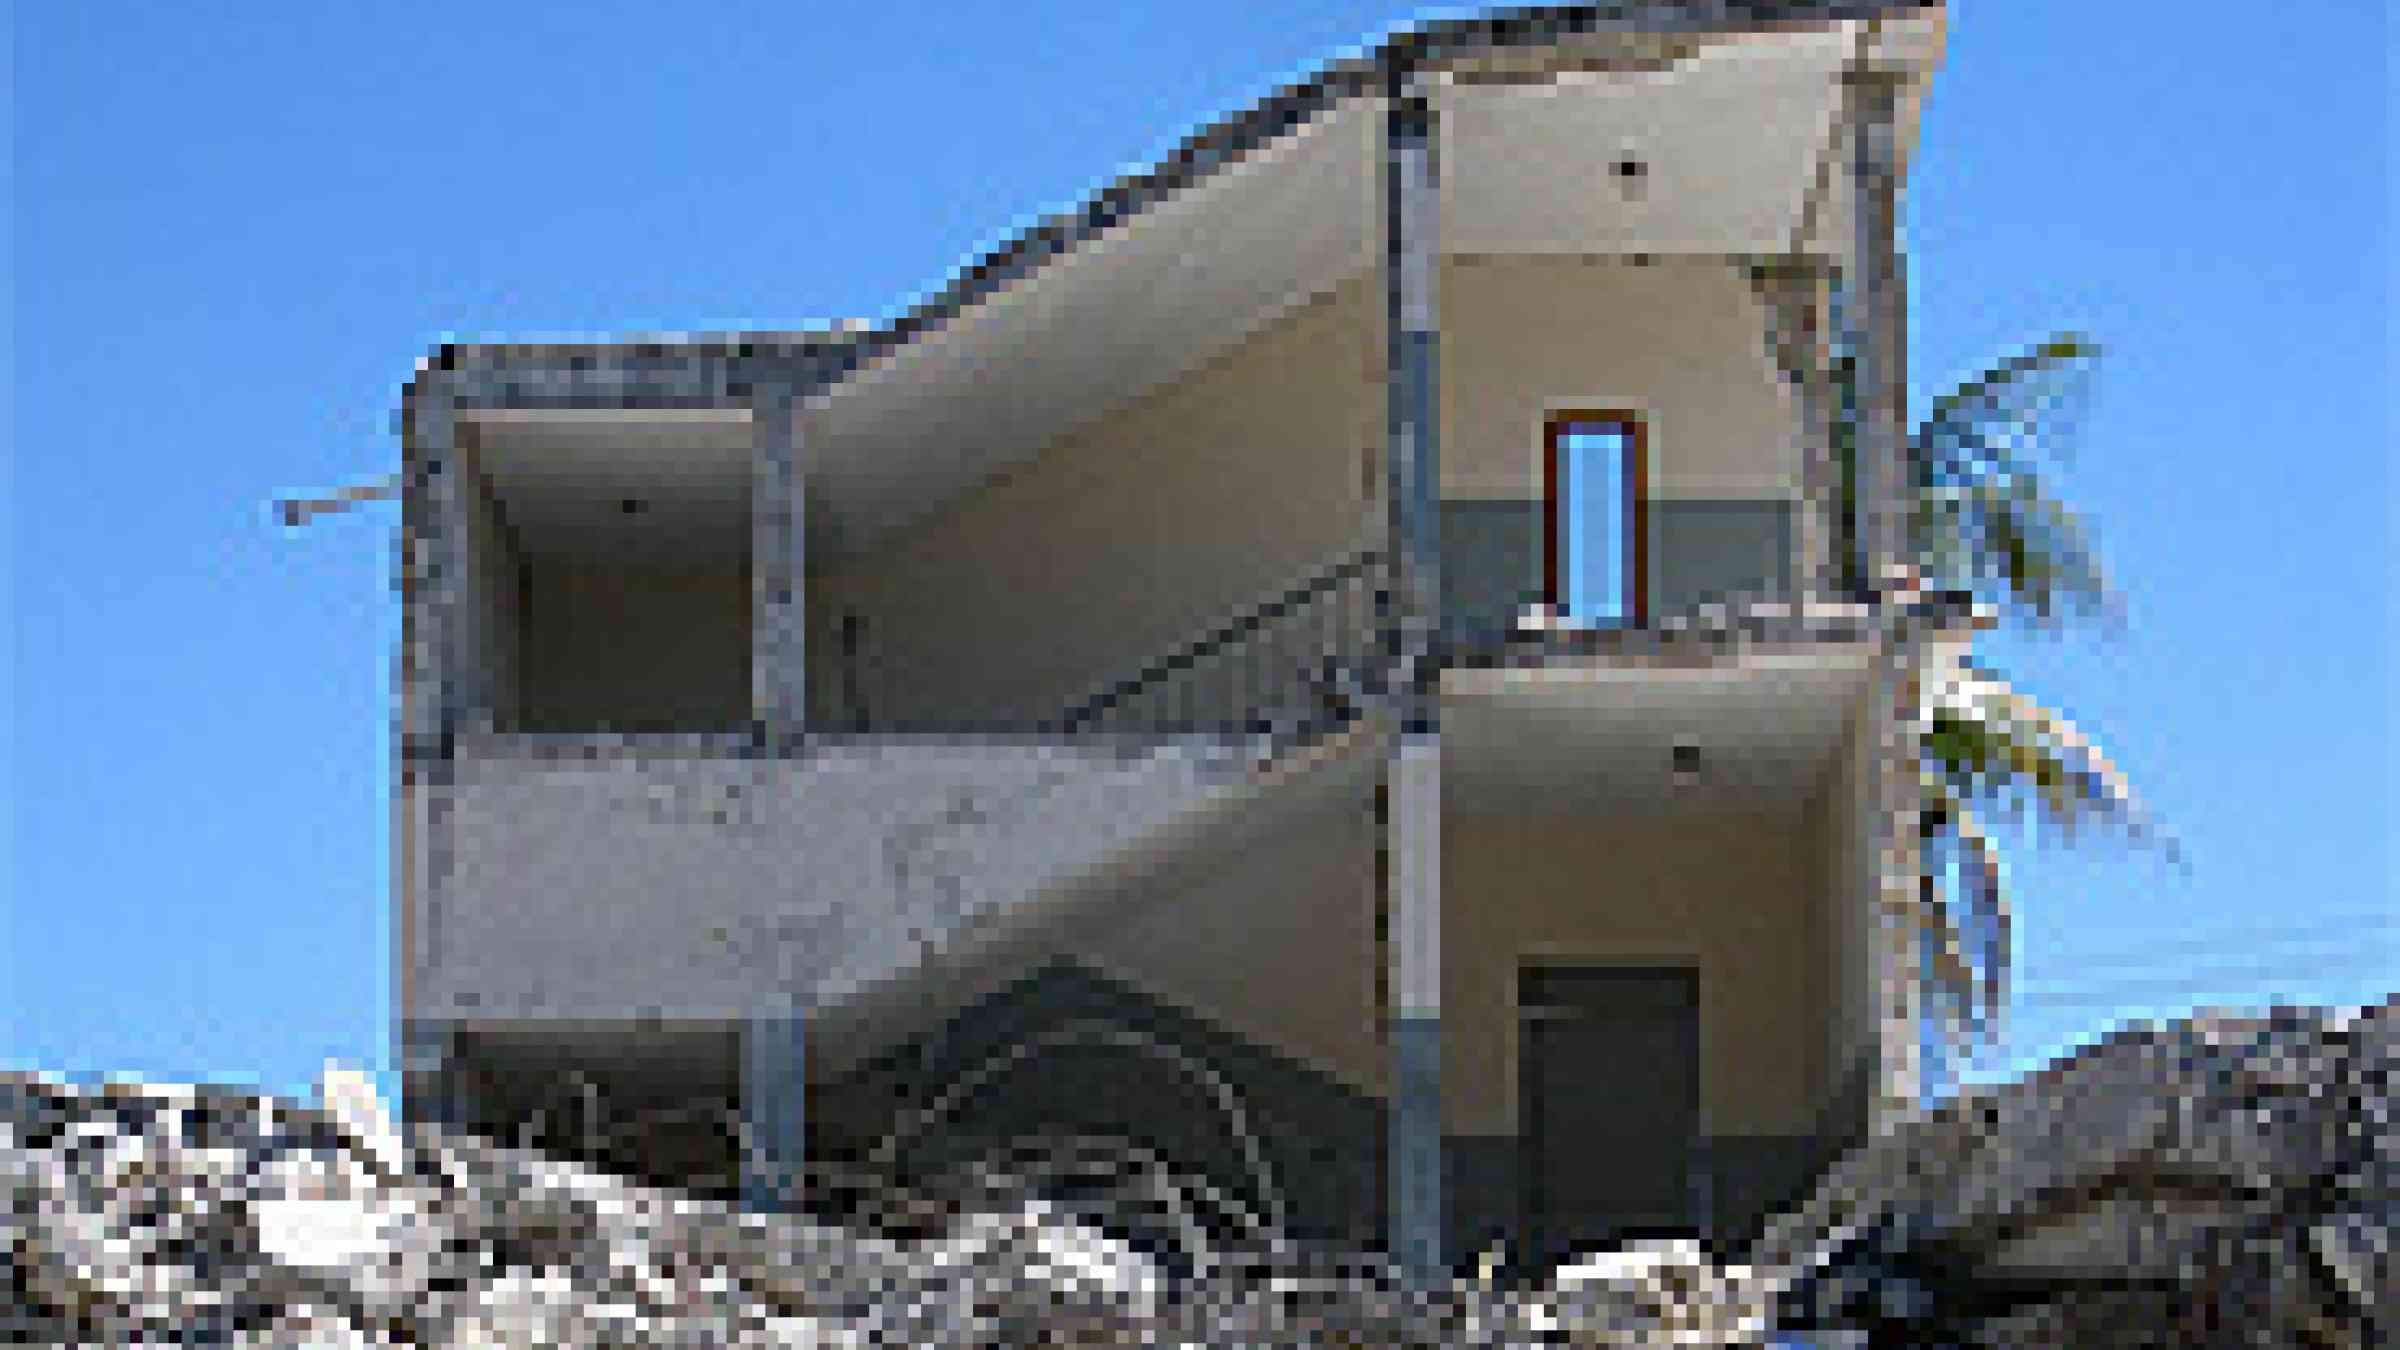 Photo of the collapsed Nursing School in Port-au-Prince by Flickr user, AIDG, Creative Commons Attribution-Noncommercial-Share Alike 2.0 Generic, http://www.flickr.com/photos/aidg/4323575087/